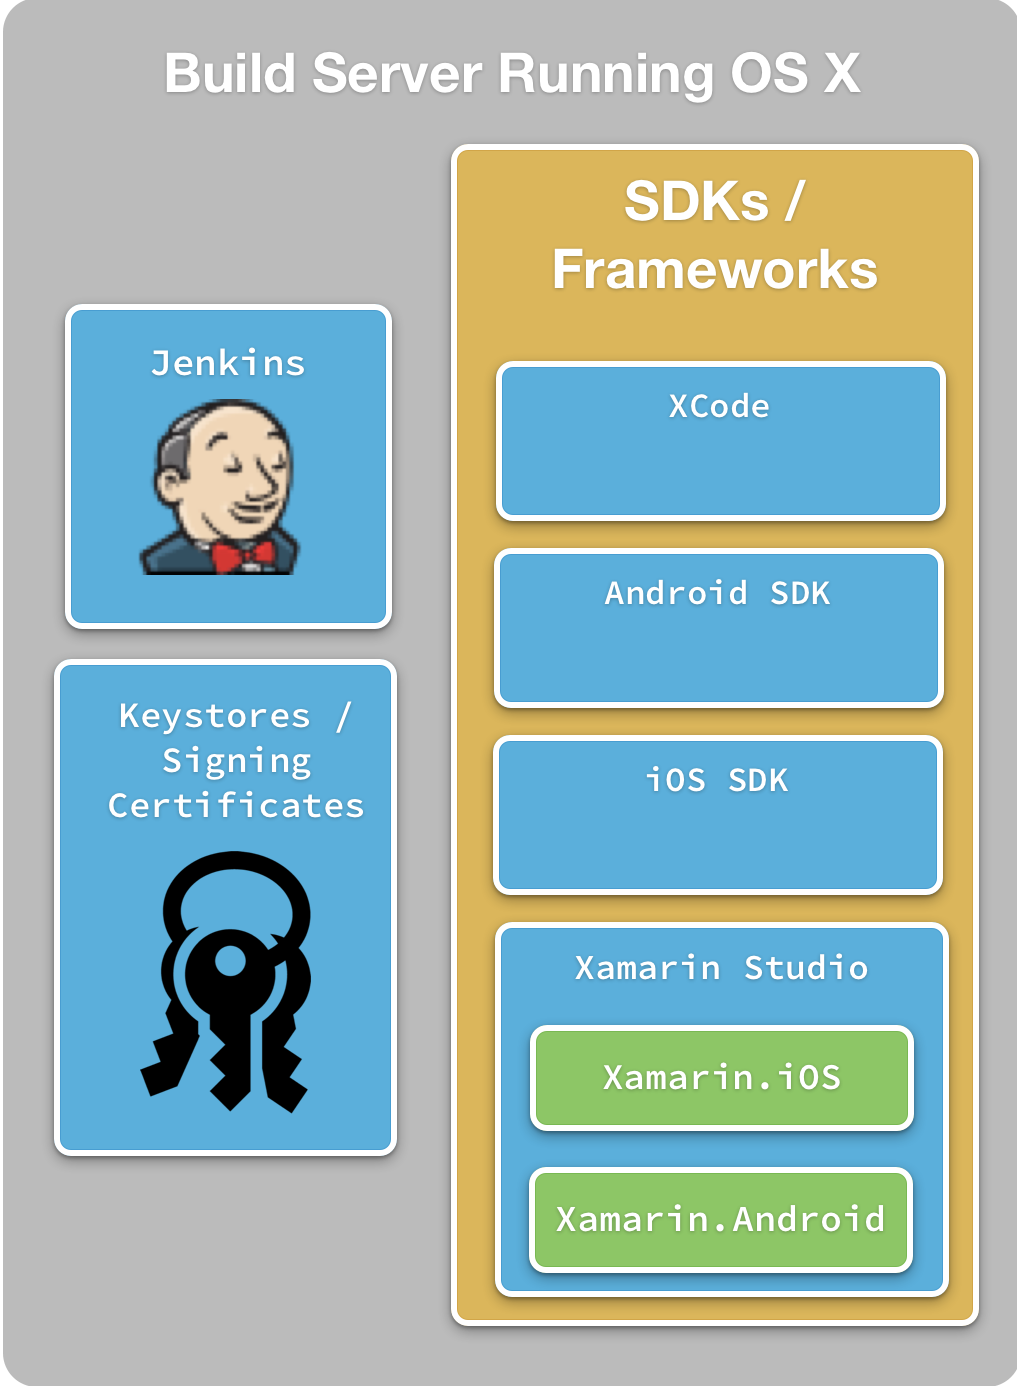 This diagram illustrates all of these elements on a typical Jenkins build server